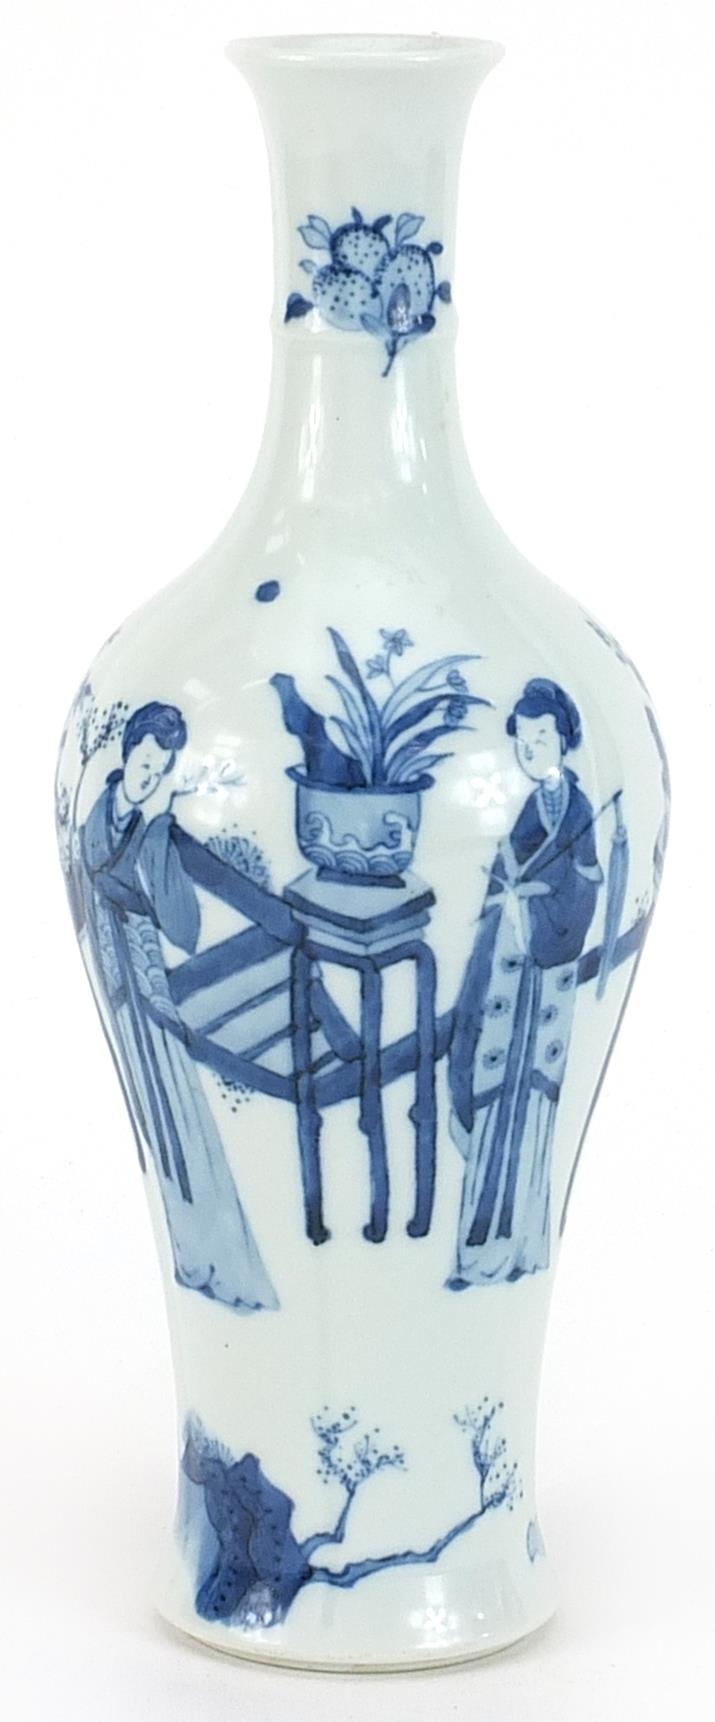 Chinese blue and white porcelain vase hand painted with figures in a palace setting, six figure - Image 2 of 3